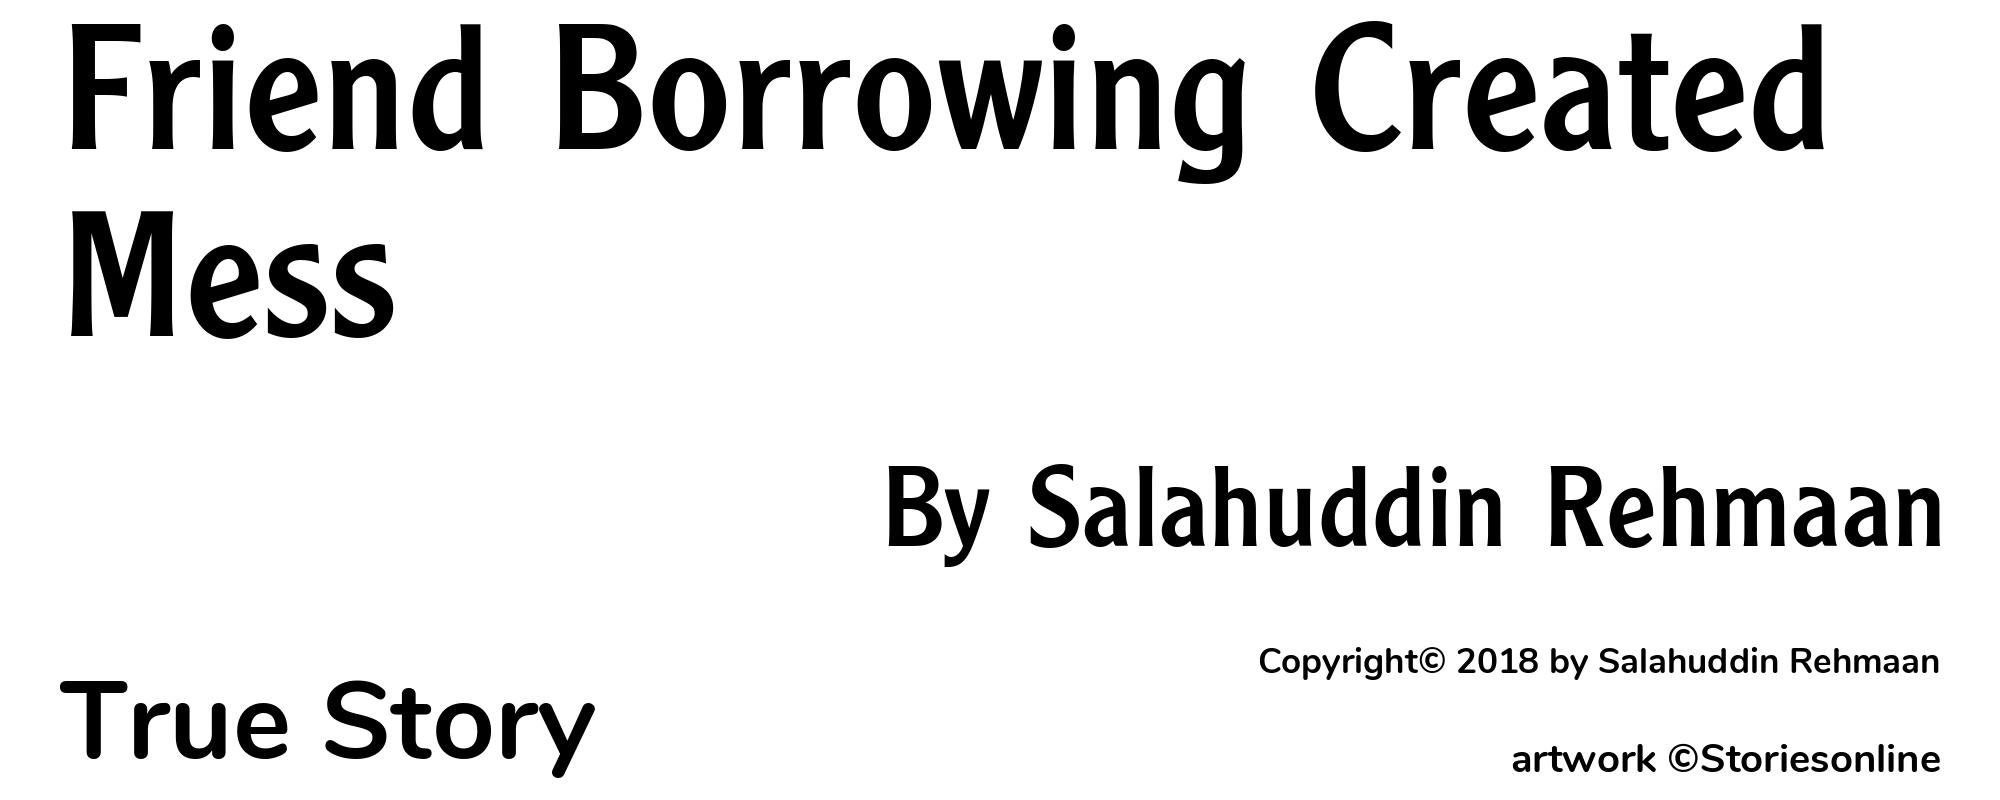 Friend Borrowing Created Mess - Cover